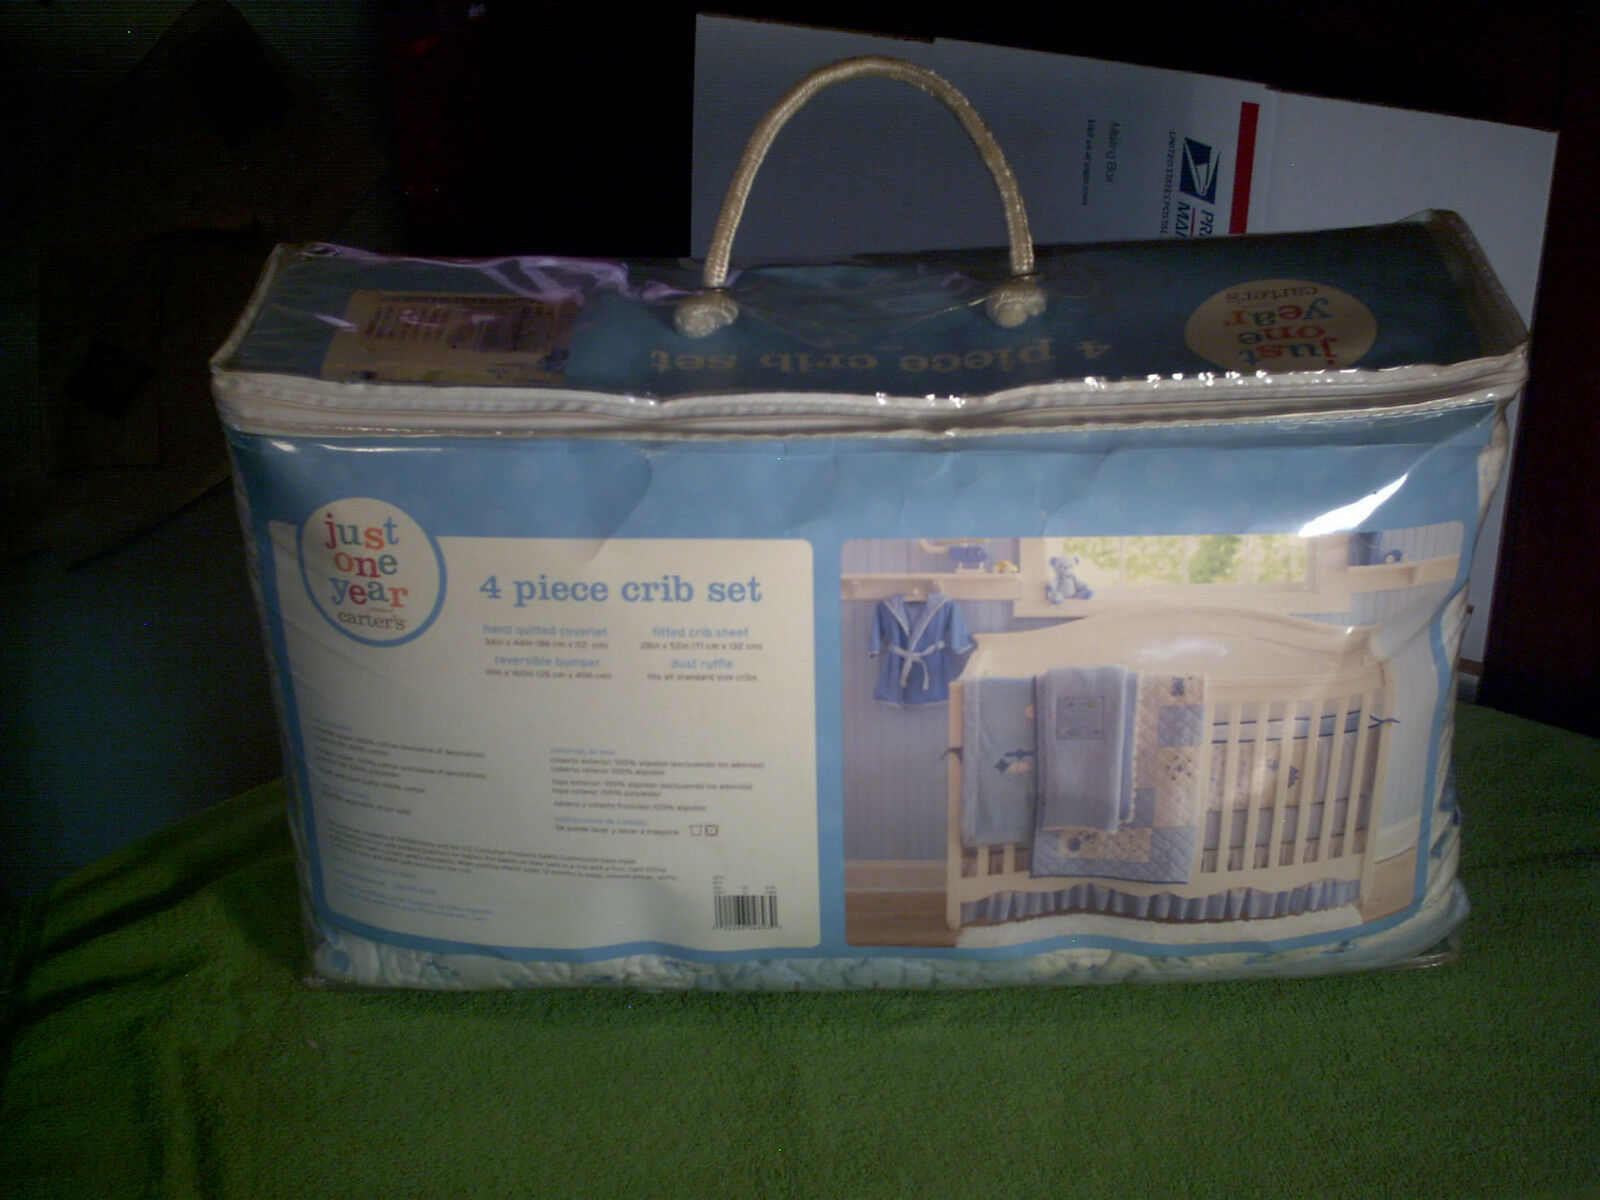 Just One Year By Carters 4 Piece Crib Set Blue Bear & Airplane Boys 2006 Unused - $77.00